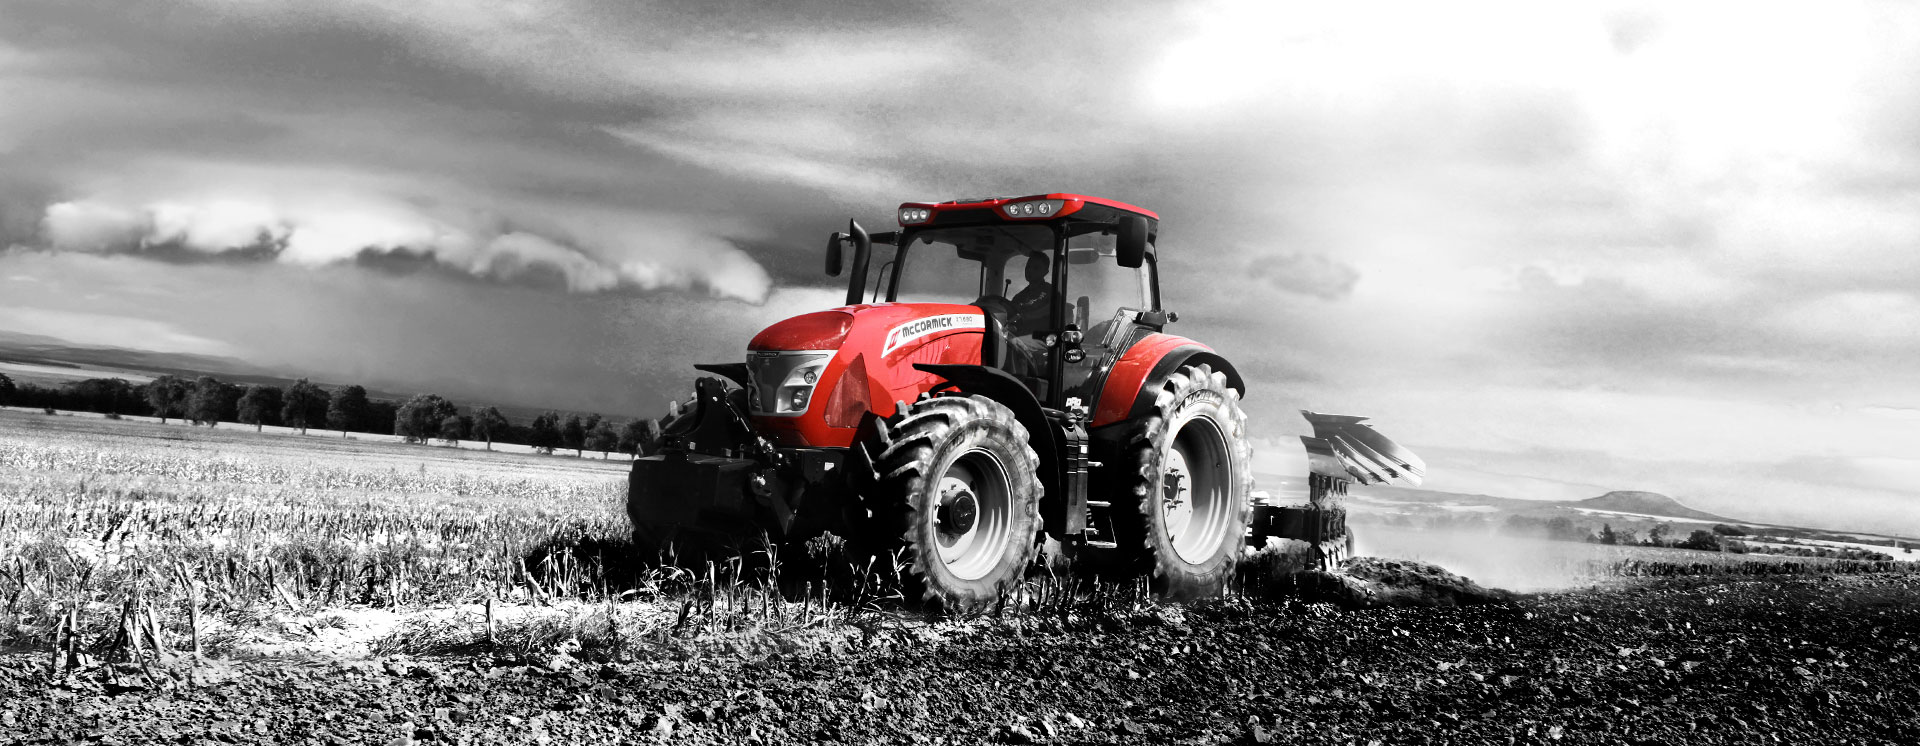 McCormick tractor working in a field